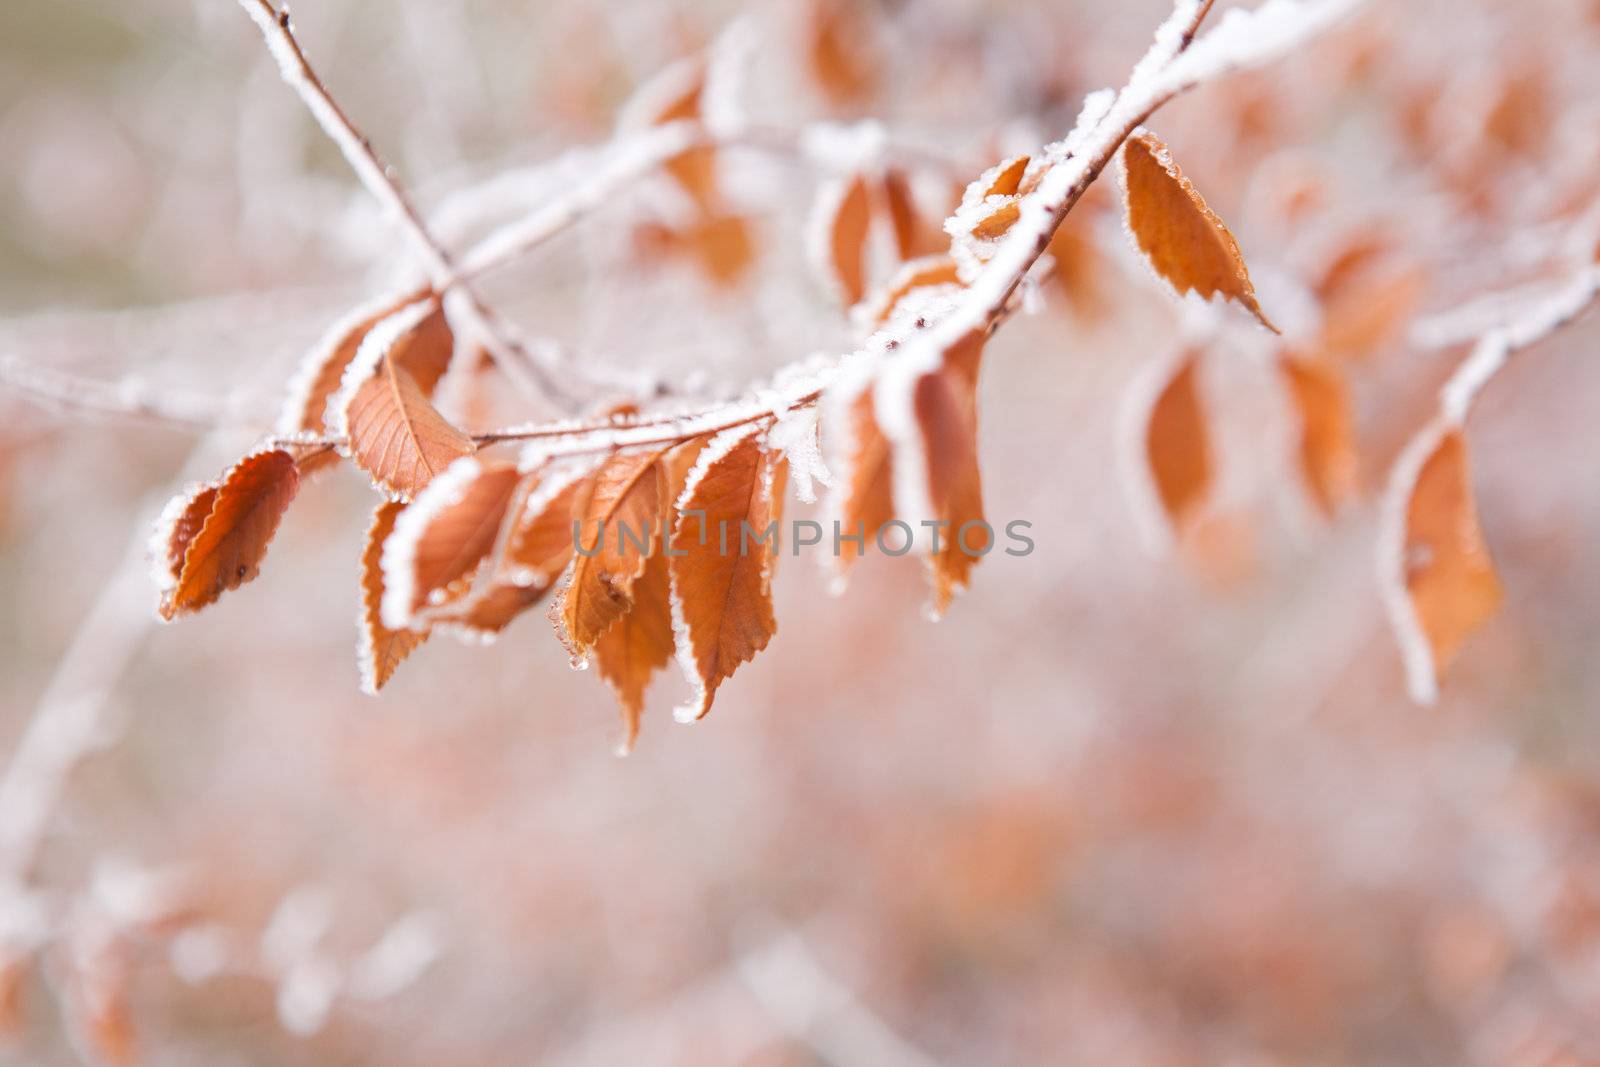 frozen leaves on the branch under the frost